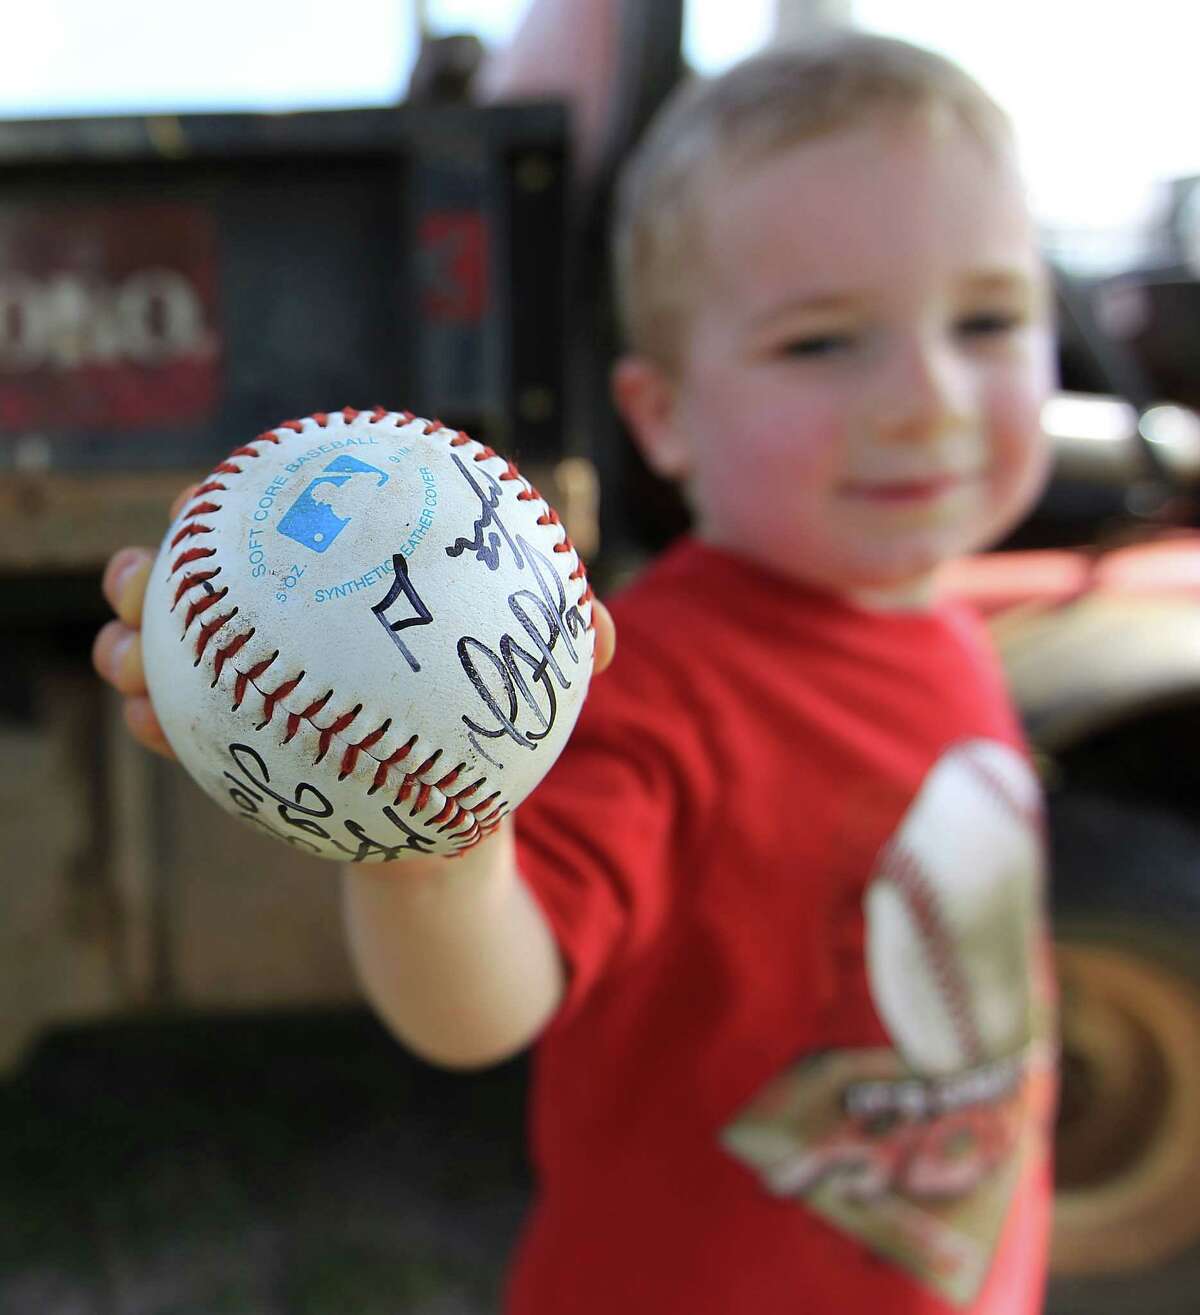 Two-year-old Wyatt Norton of Orlando shows off the fresh autographs on his new prized possession.